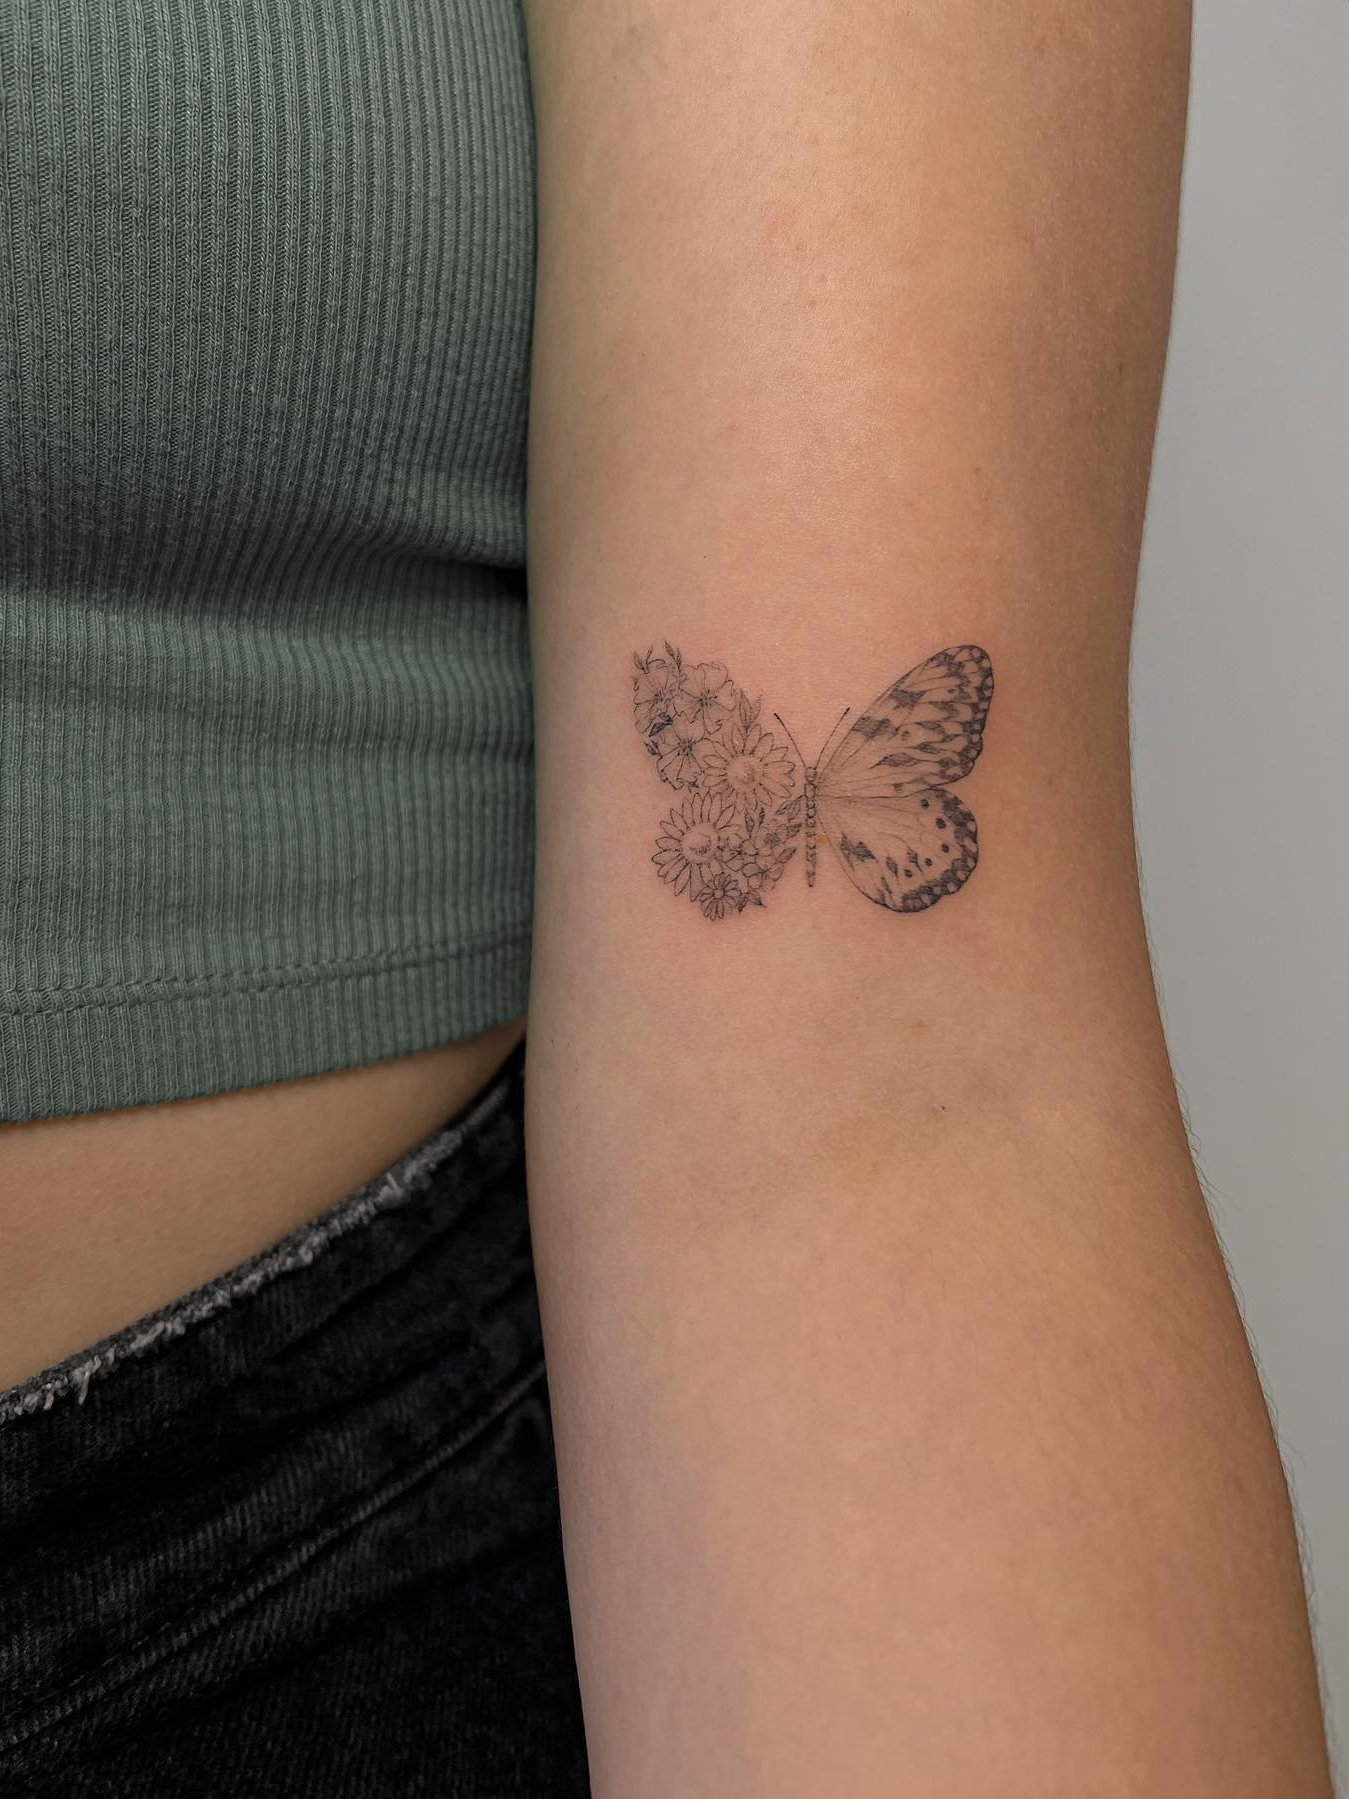 Inner Arm Tattoos for Females, butterfly tattoo ideas